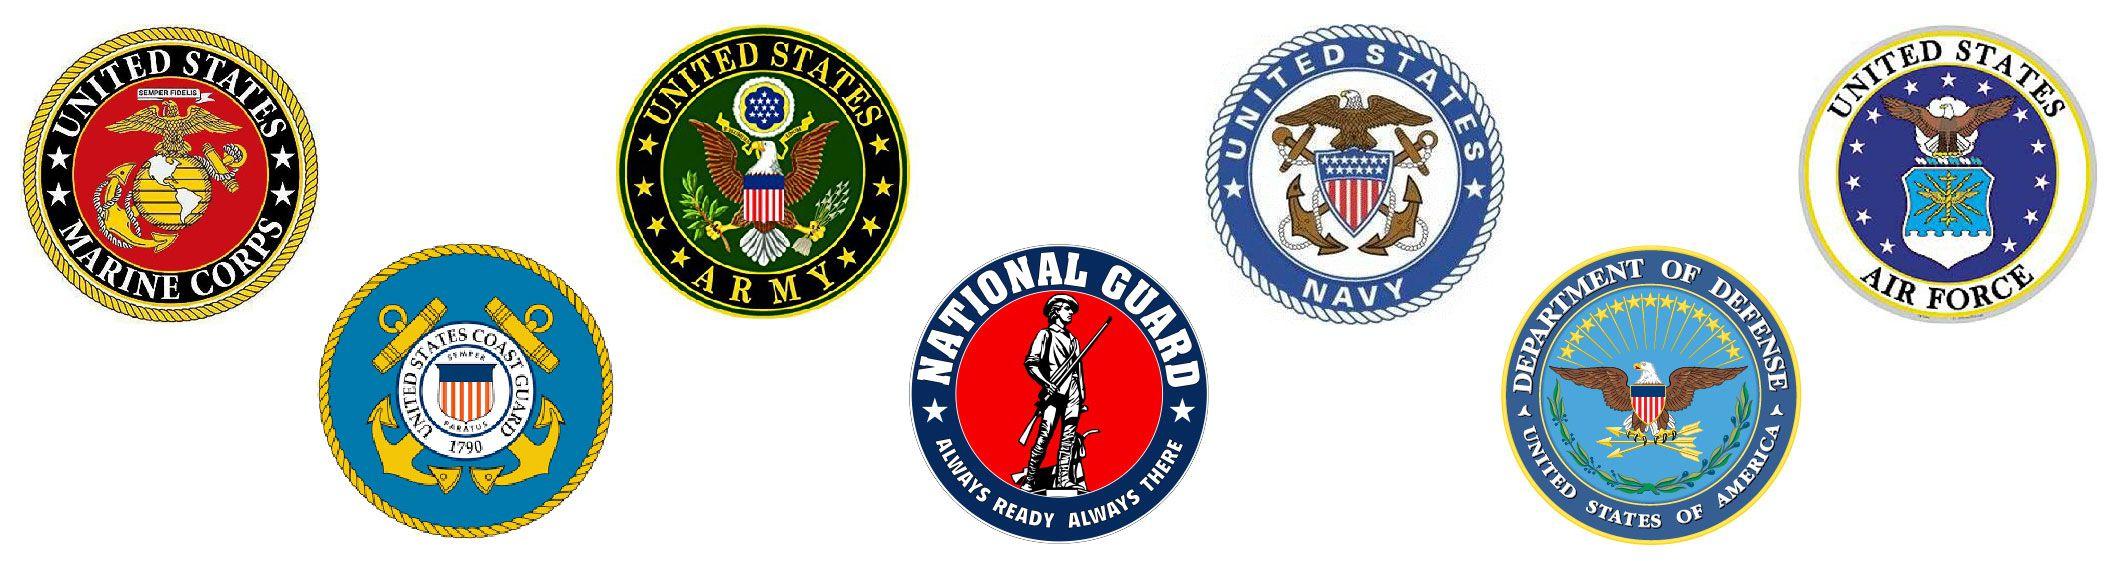 United States Military Logo - Military Learning Center of Tampa Bay | Donate & Support